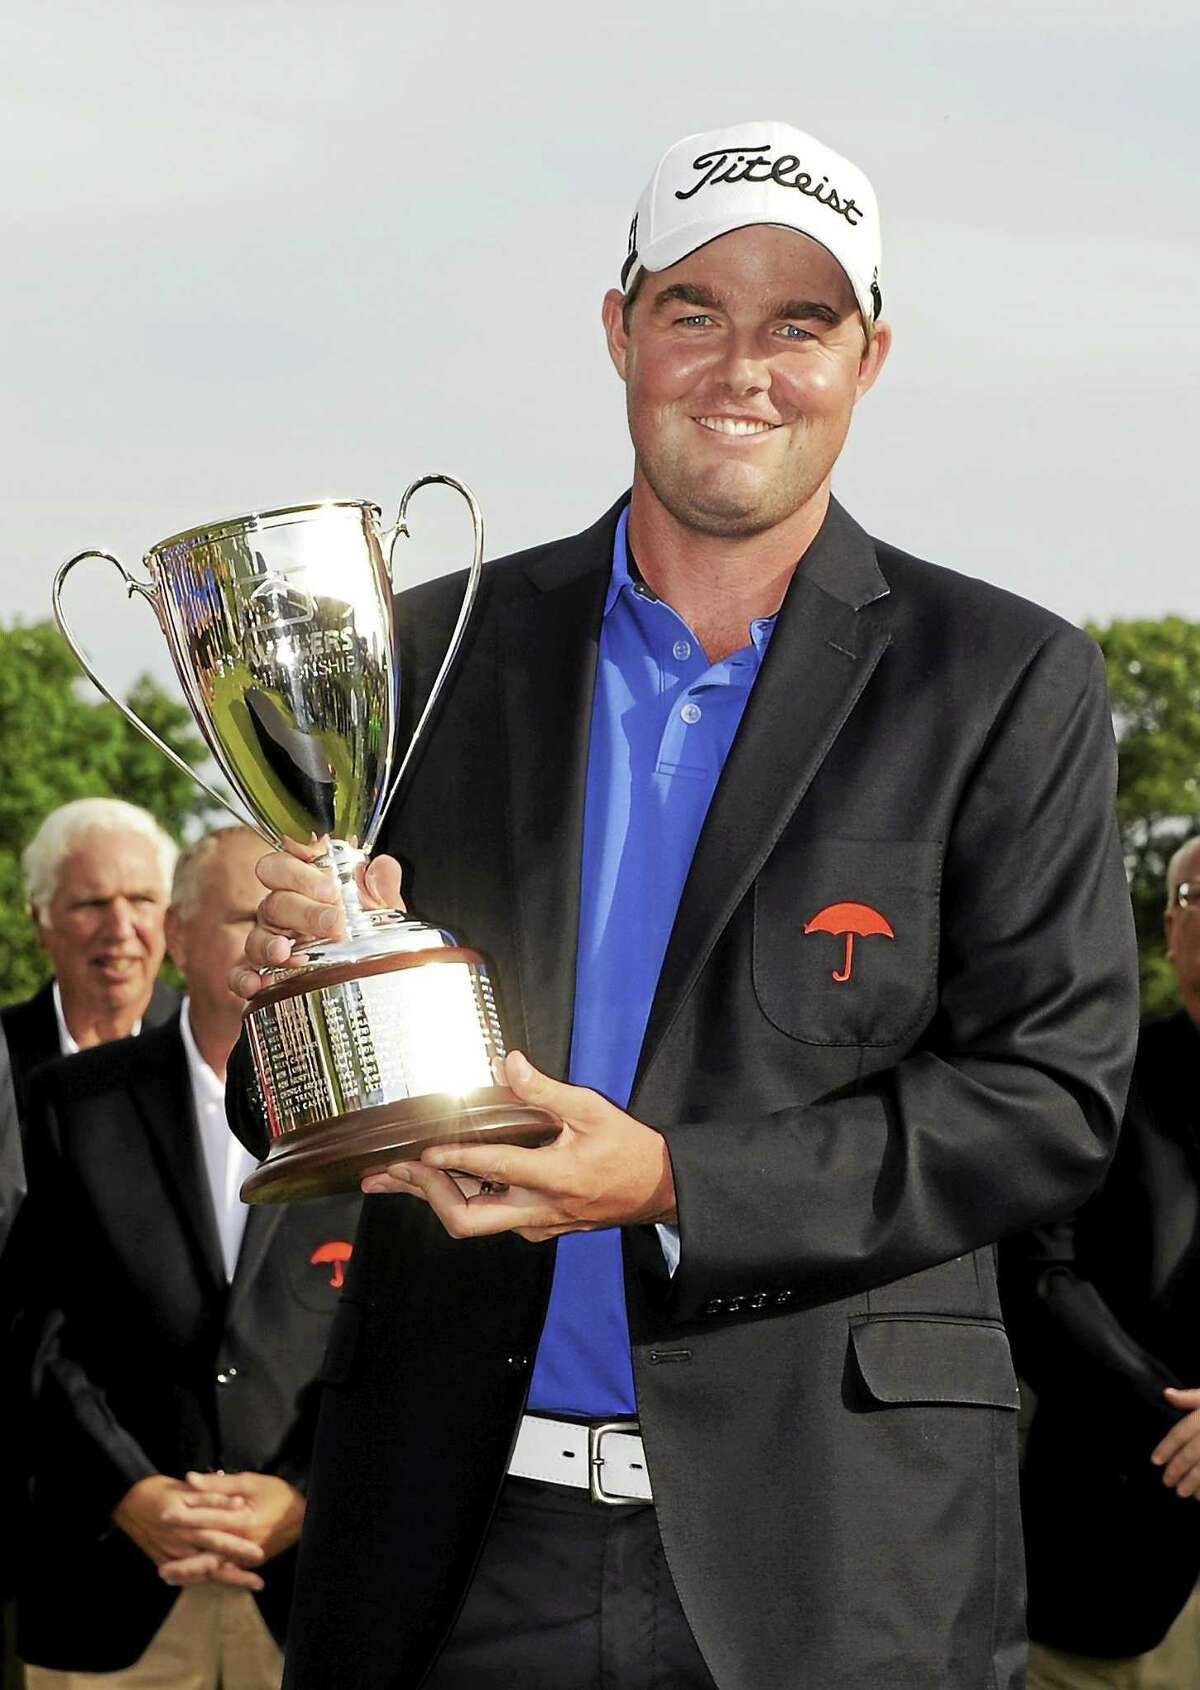 Marc Leishman celebrates after winning the Travelers Championship on June 24, 2012.